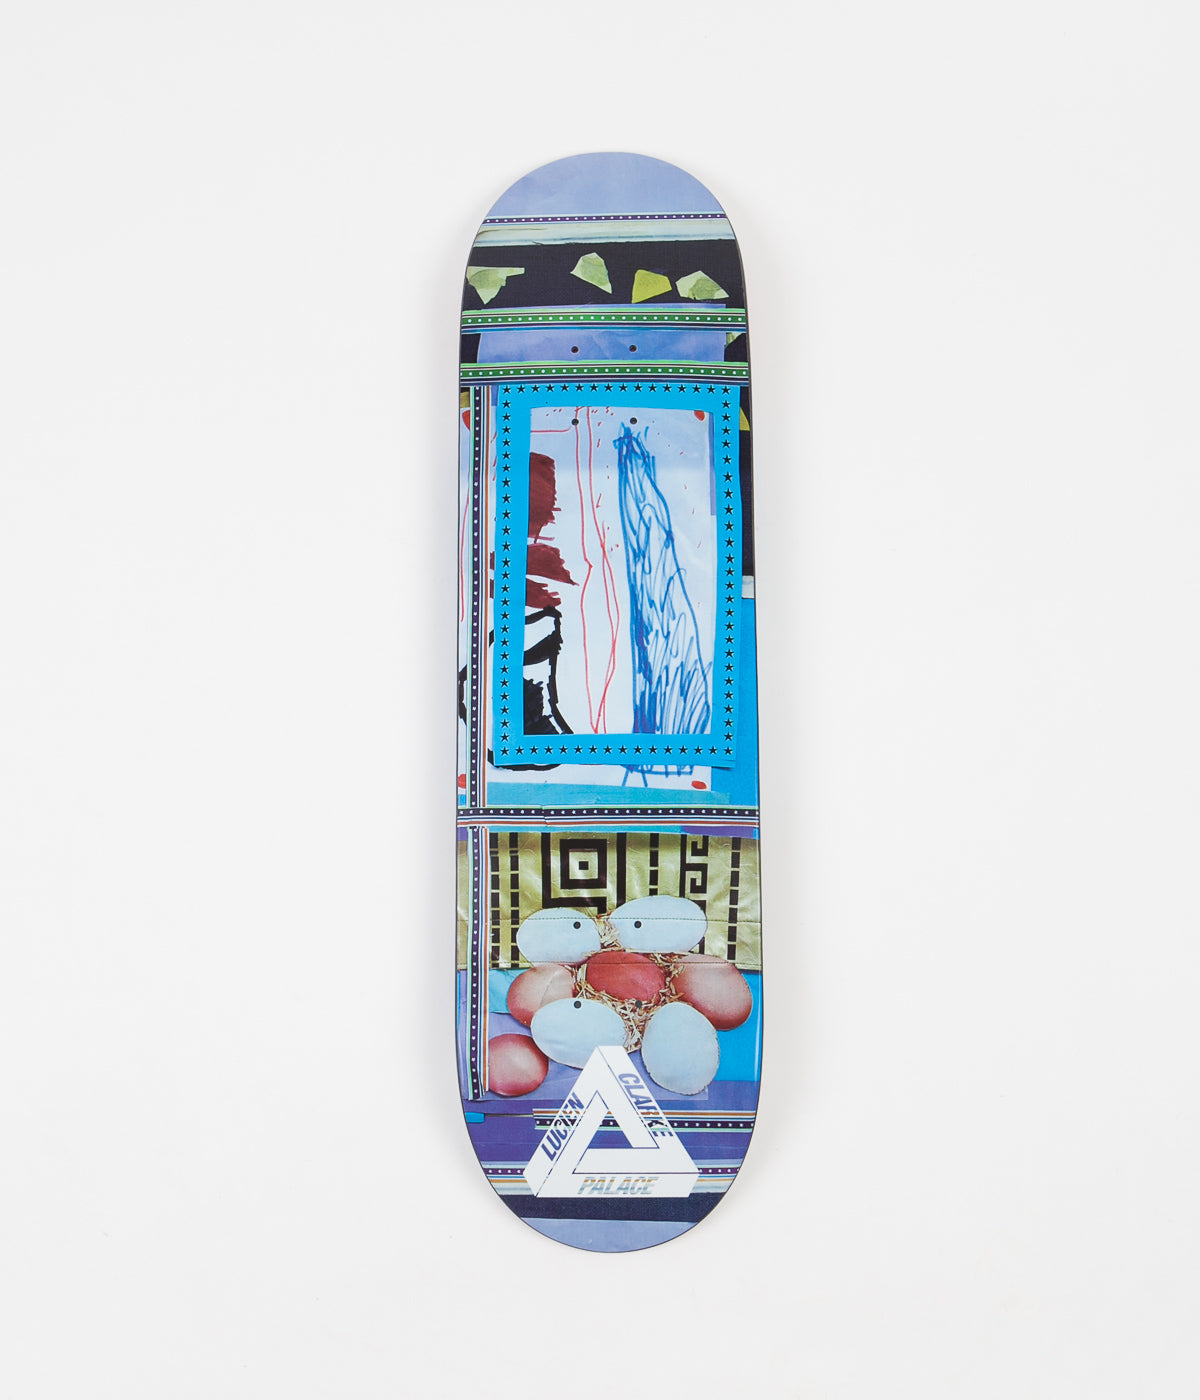 Palace Lucien Clarke Pro S29 Skate Deck 8.25 – People Skate and Snowboard